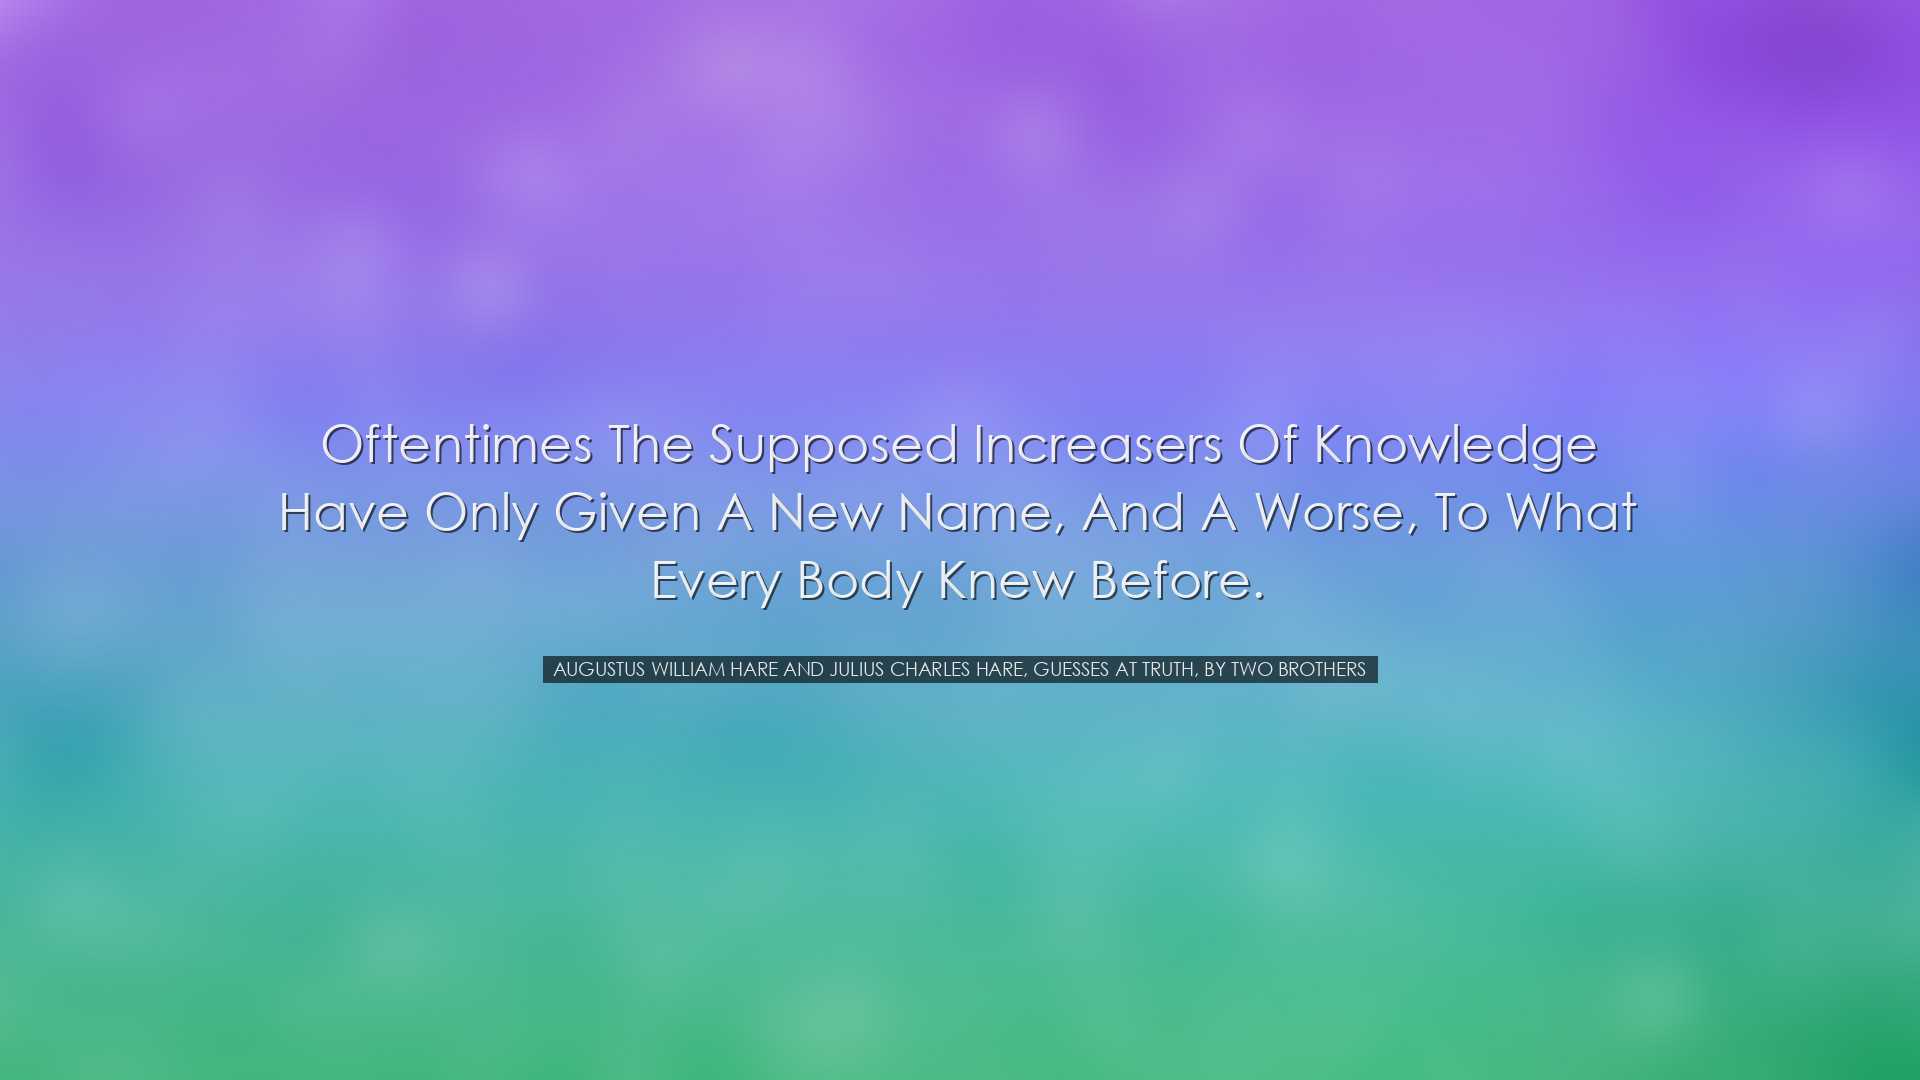 Oftentimes the supposed increasers of knowledge have only given a